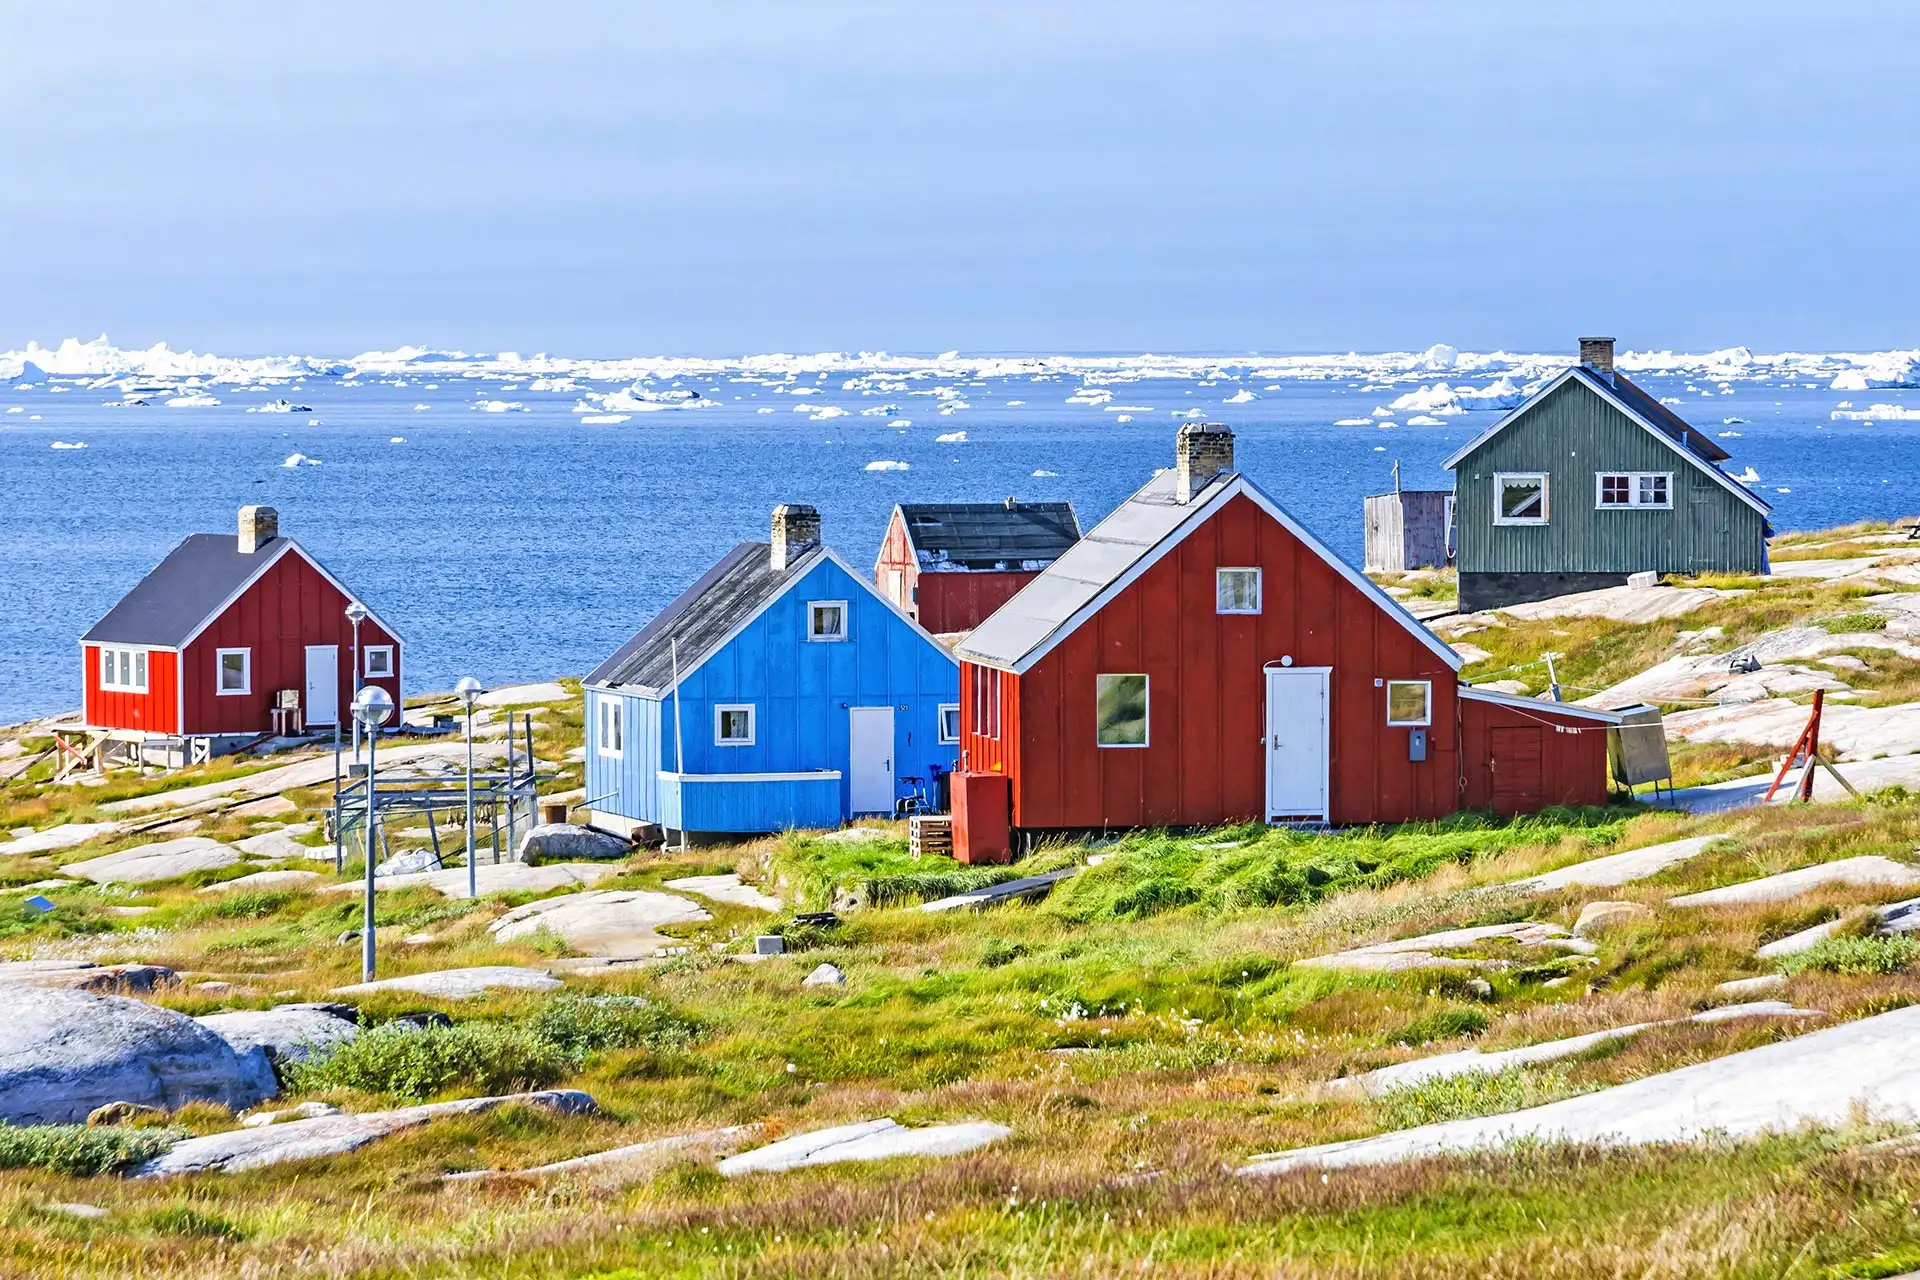 The colorful houses of Rodebay, Greenland